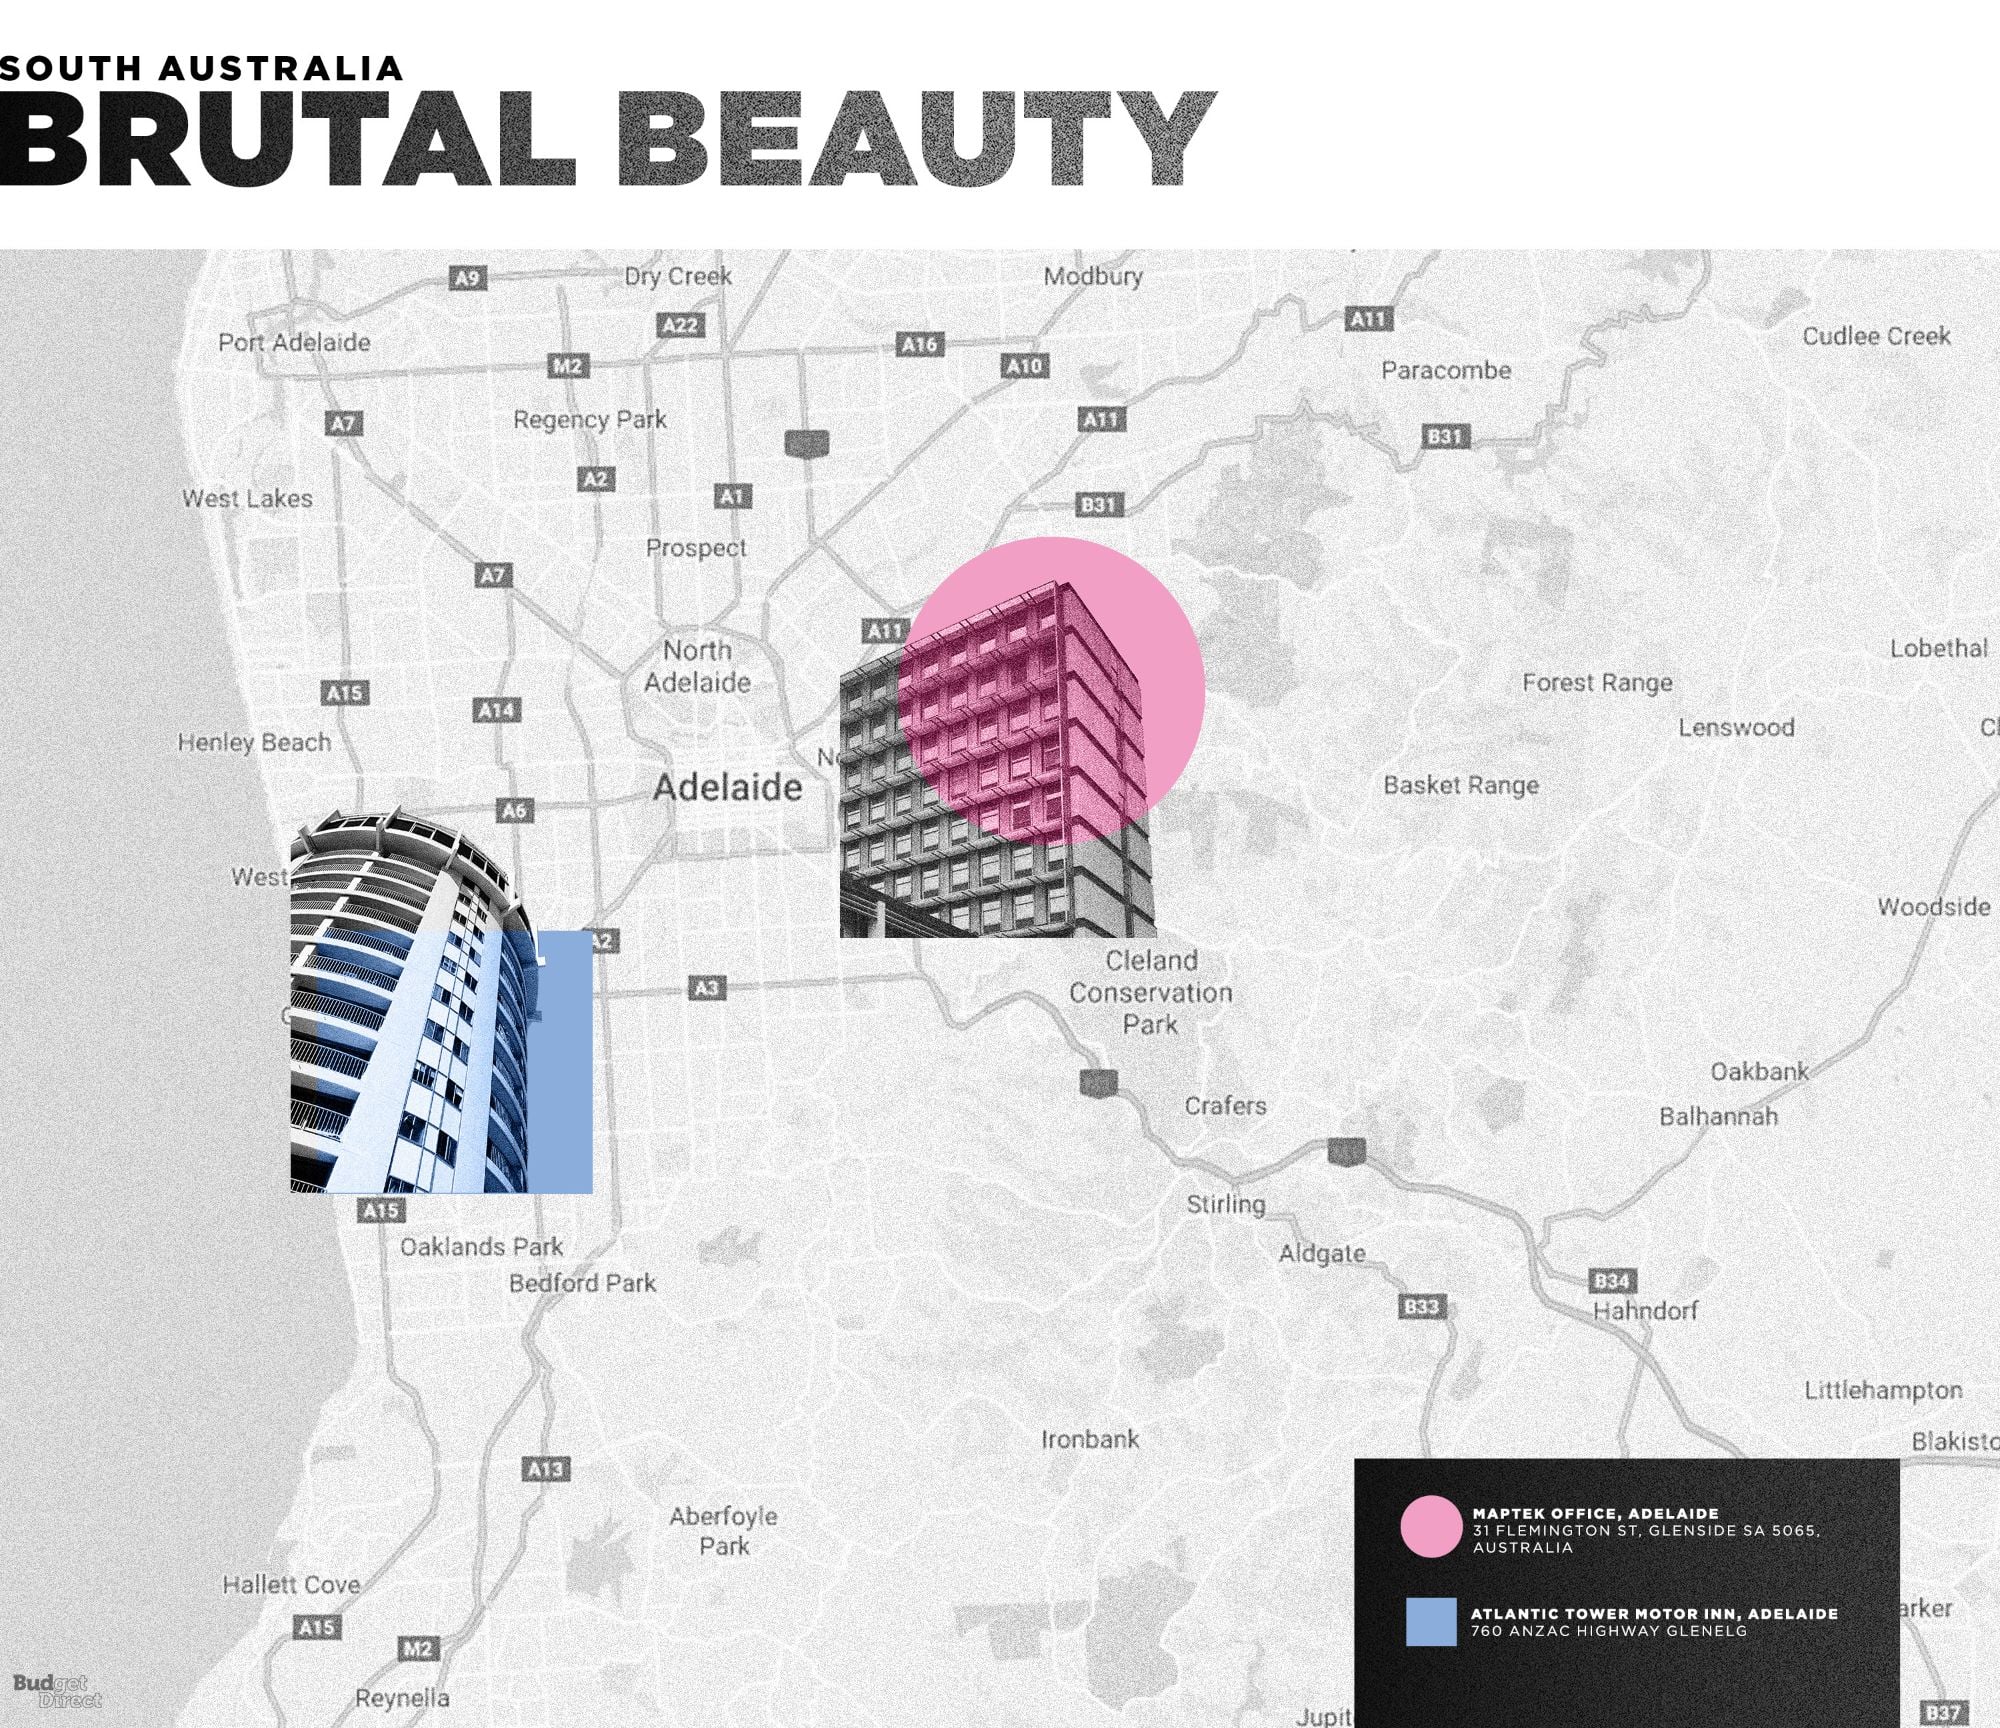 Map shows all the buildings from South Australia featured in Budget Direct Travel Insurance's tribute to Aussie Brutalism.